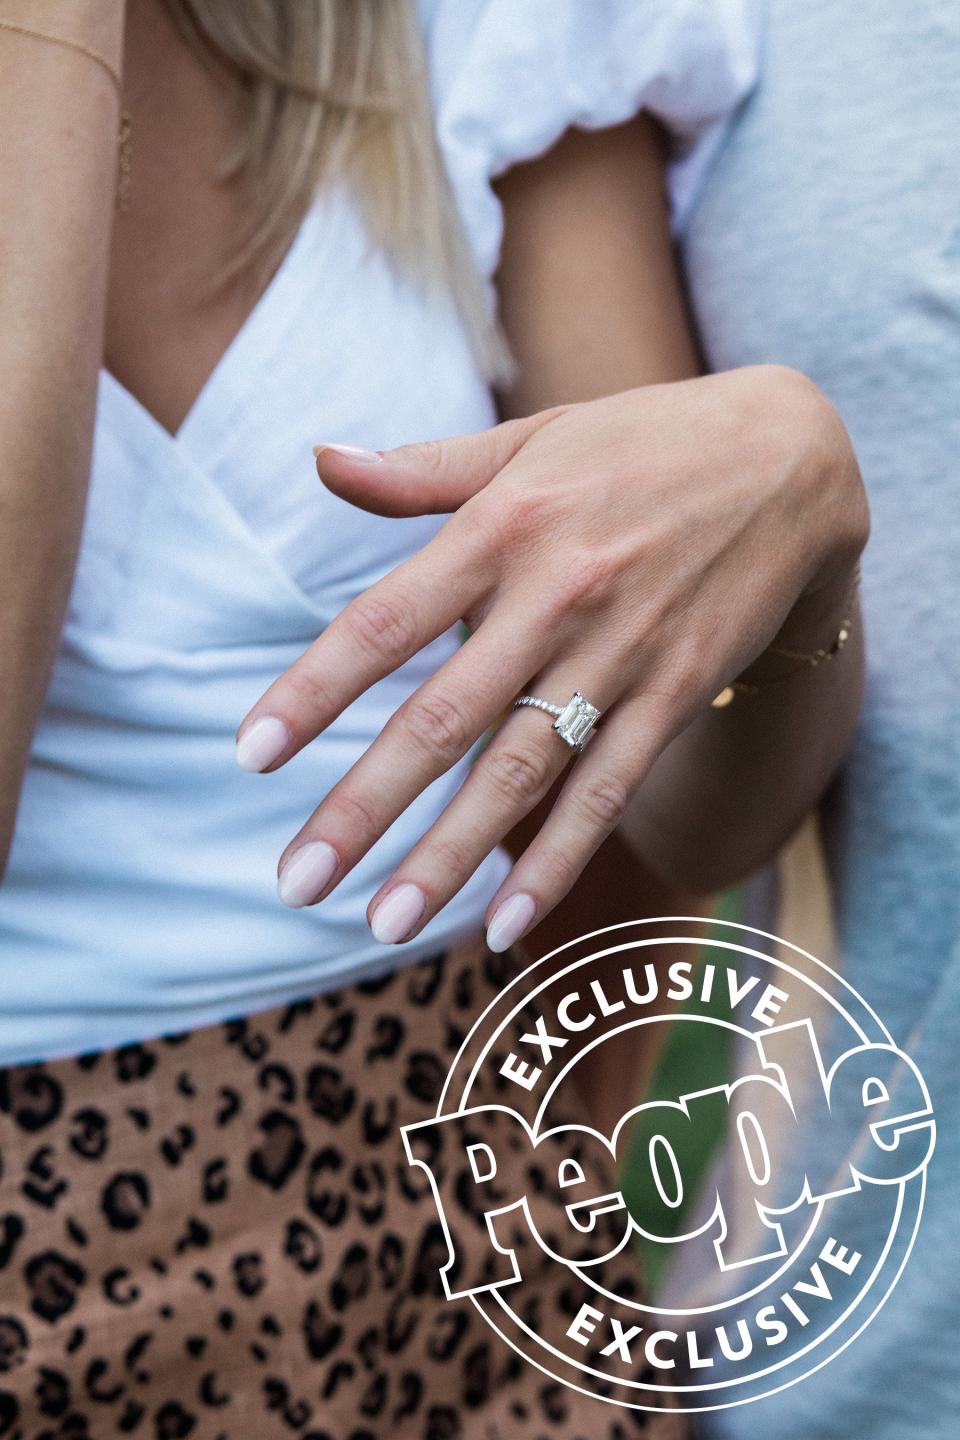 “Watching her try on rings, I learned she loves emerald-cut diamonds. I even heard her say that was the exact kind of ring she wanted. Thankfully she made it pretty easy to pick out!”